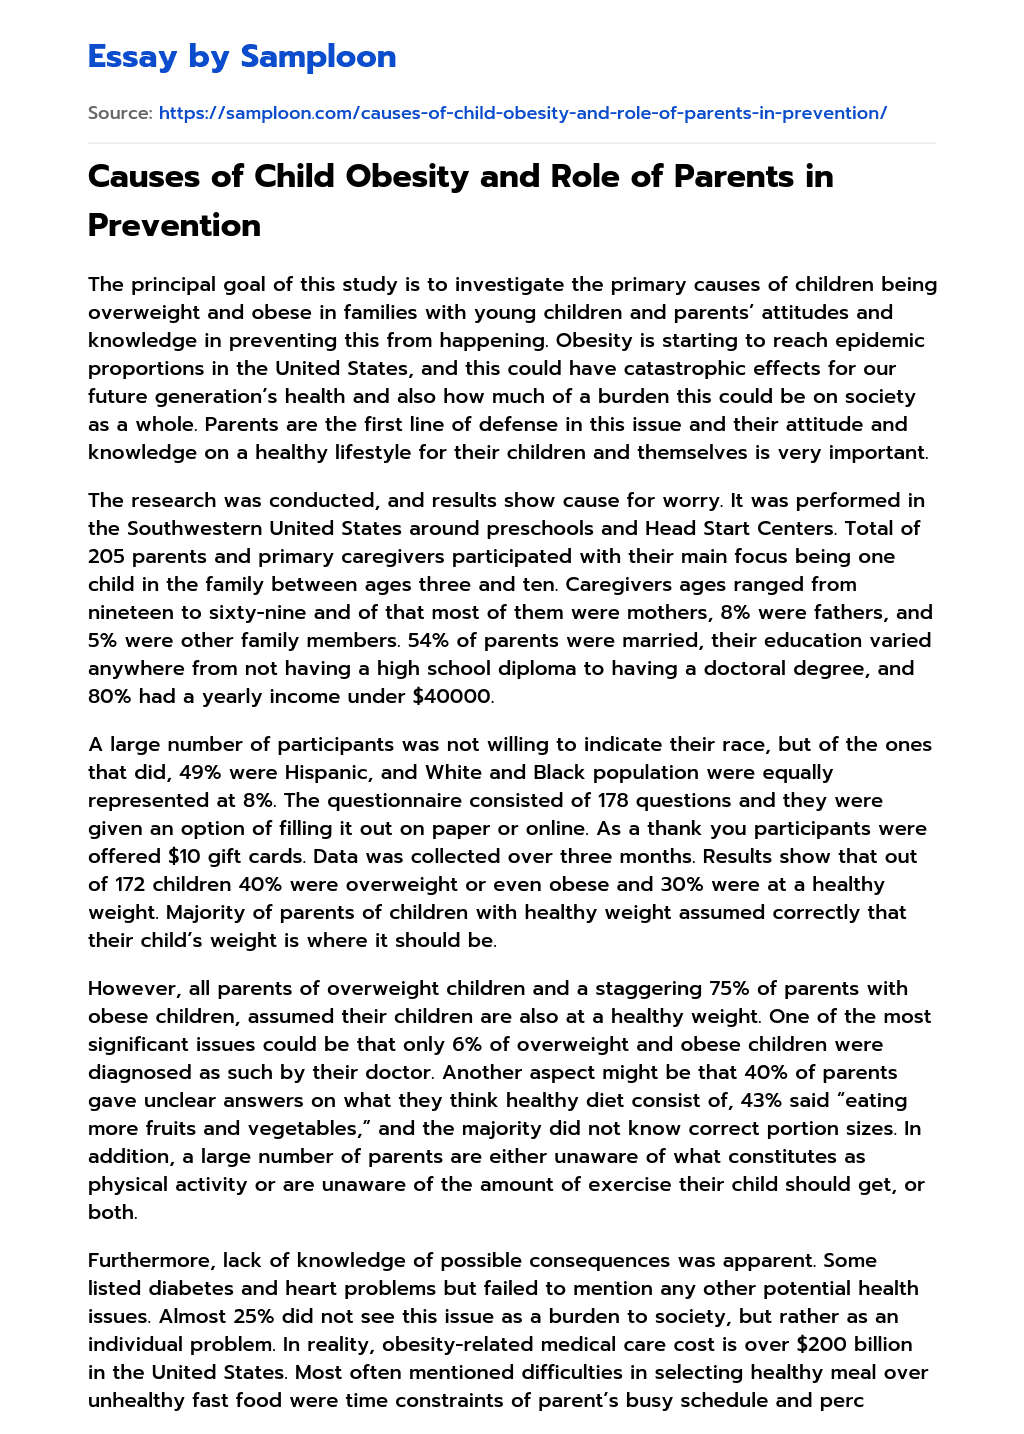 Causes of Child Obesity and Role of Parents in Prevention essay